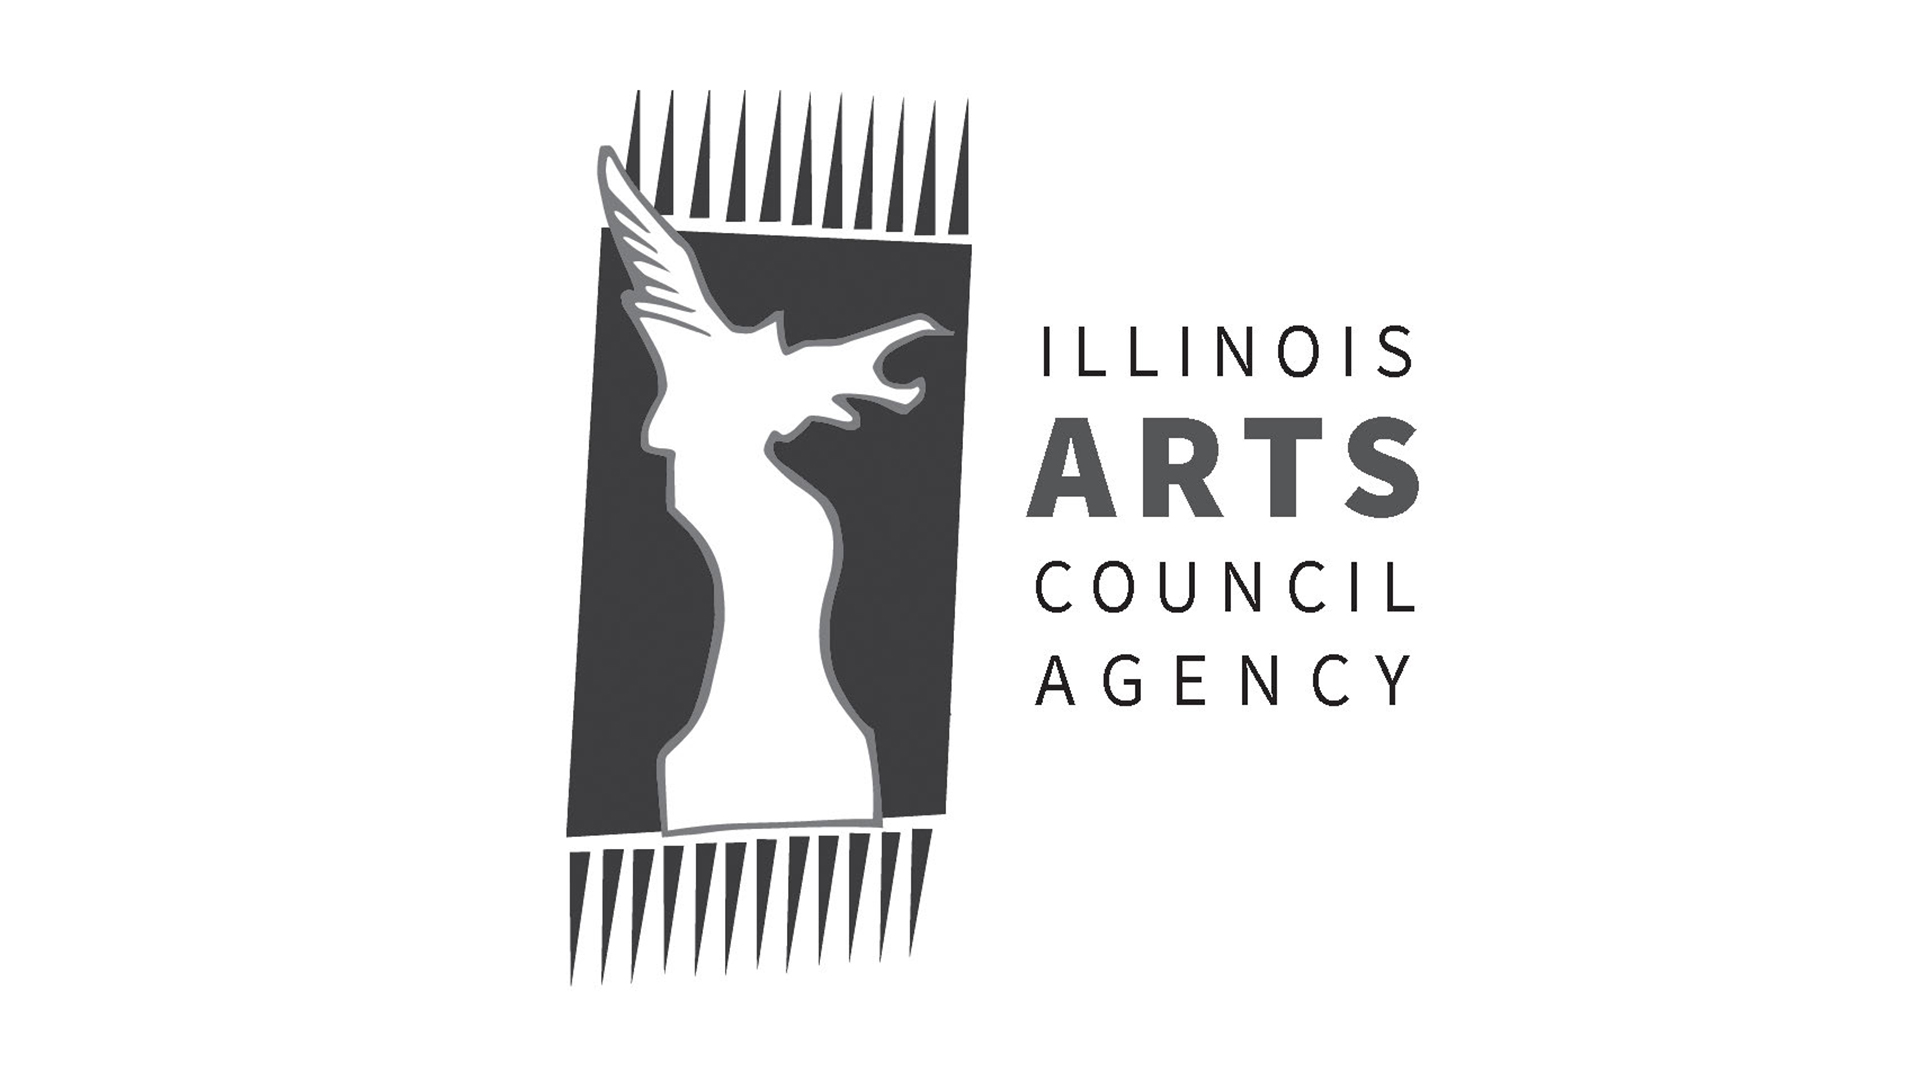 Illinois Arts Council greyscale logo of a textile overlaid by a winged figure silhouette